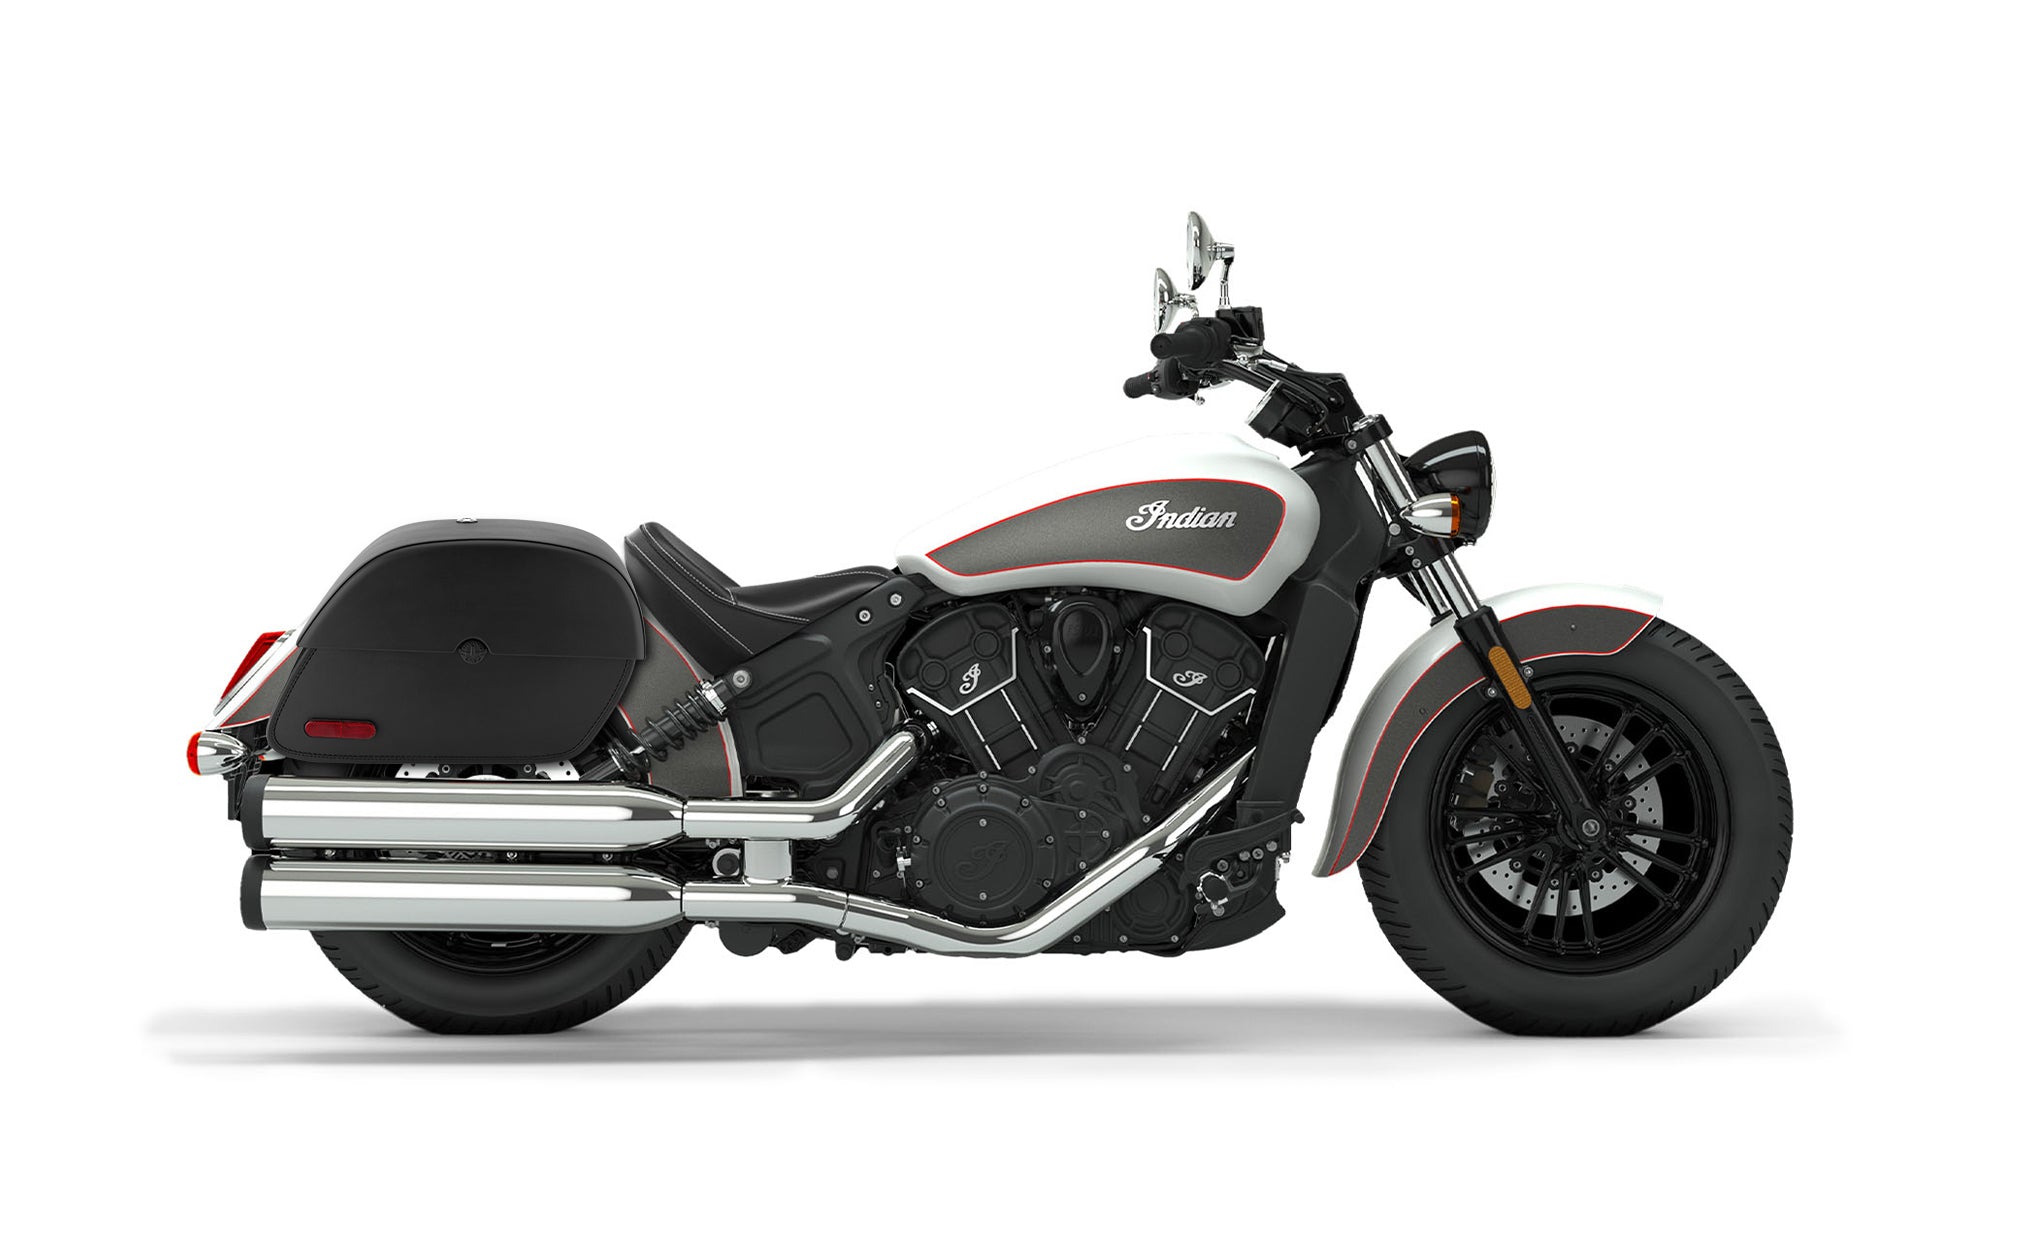 Viking Panzer Medium Indian Scout Sixty Leather Motorcycle Saddlebags Engineering Excellence with Bag on Bike @expand